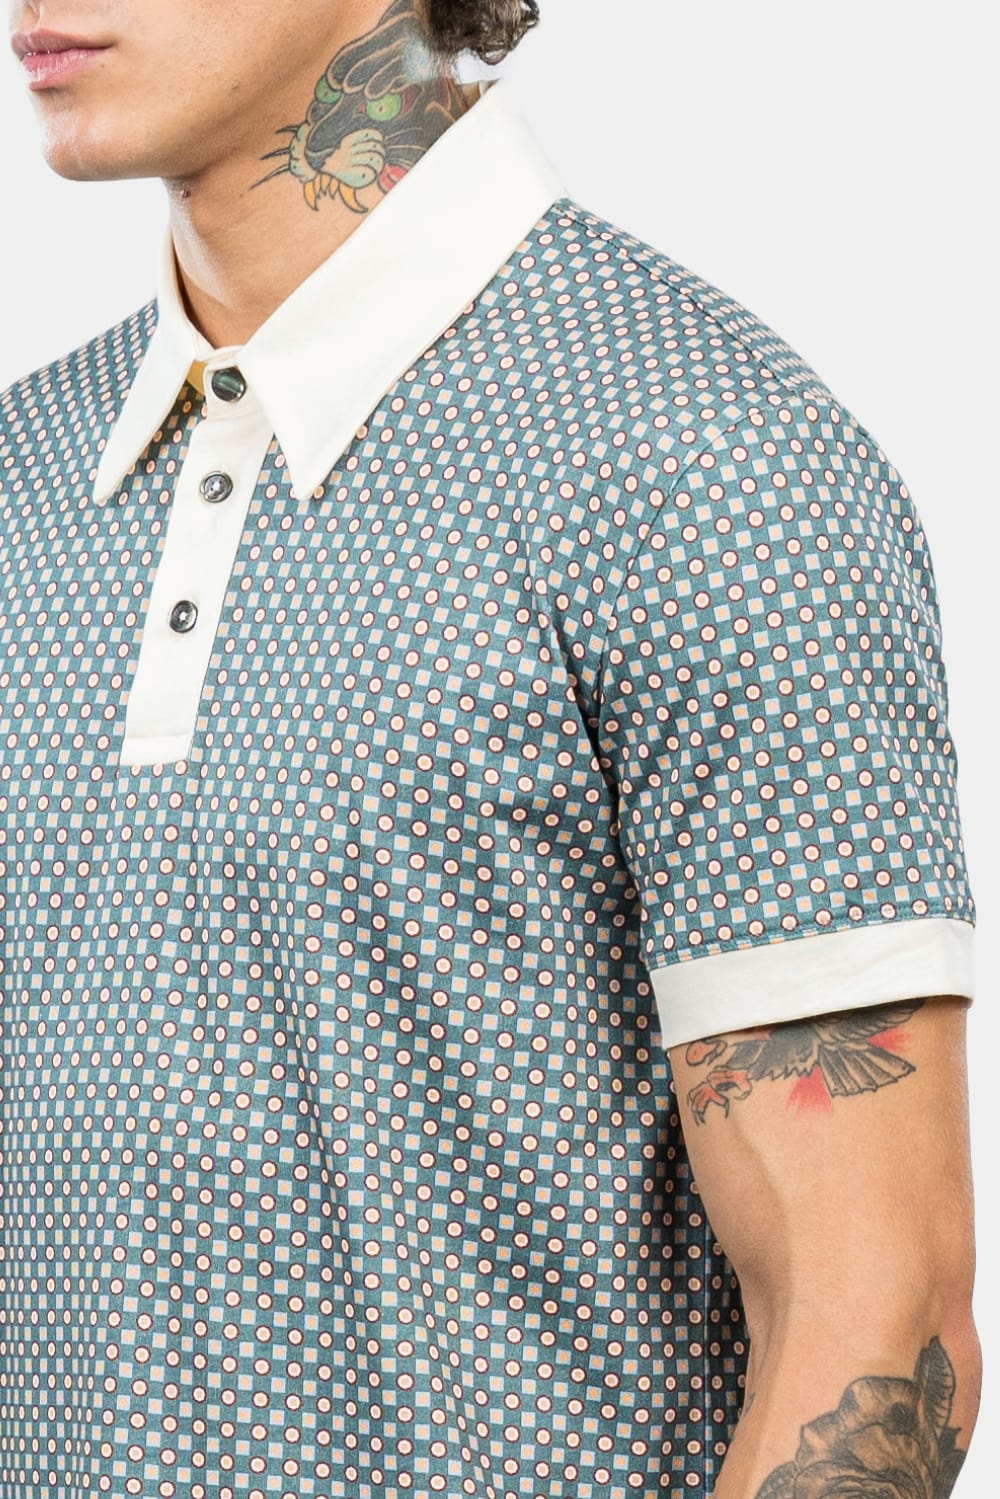 Vintage Character Jersey Polo